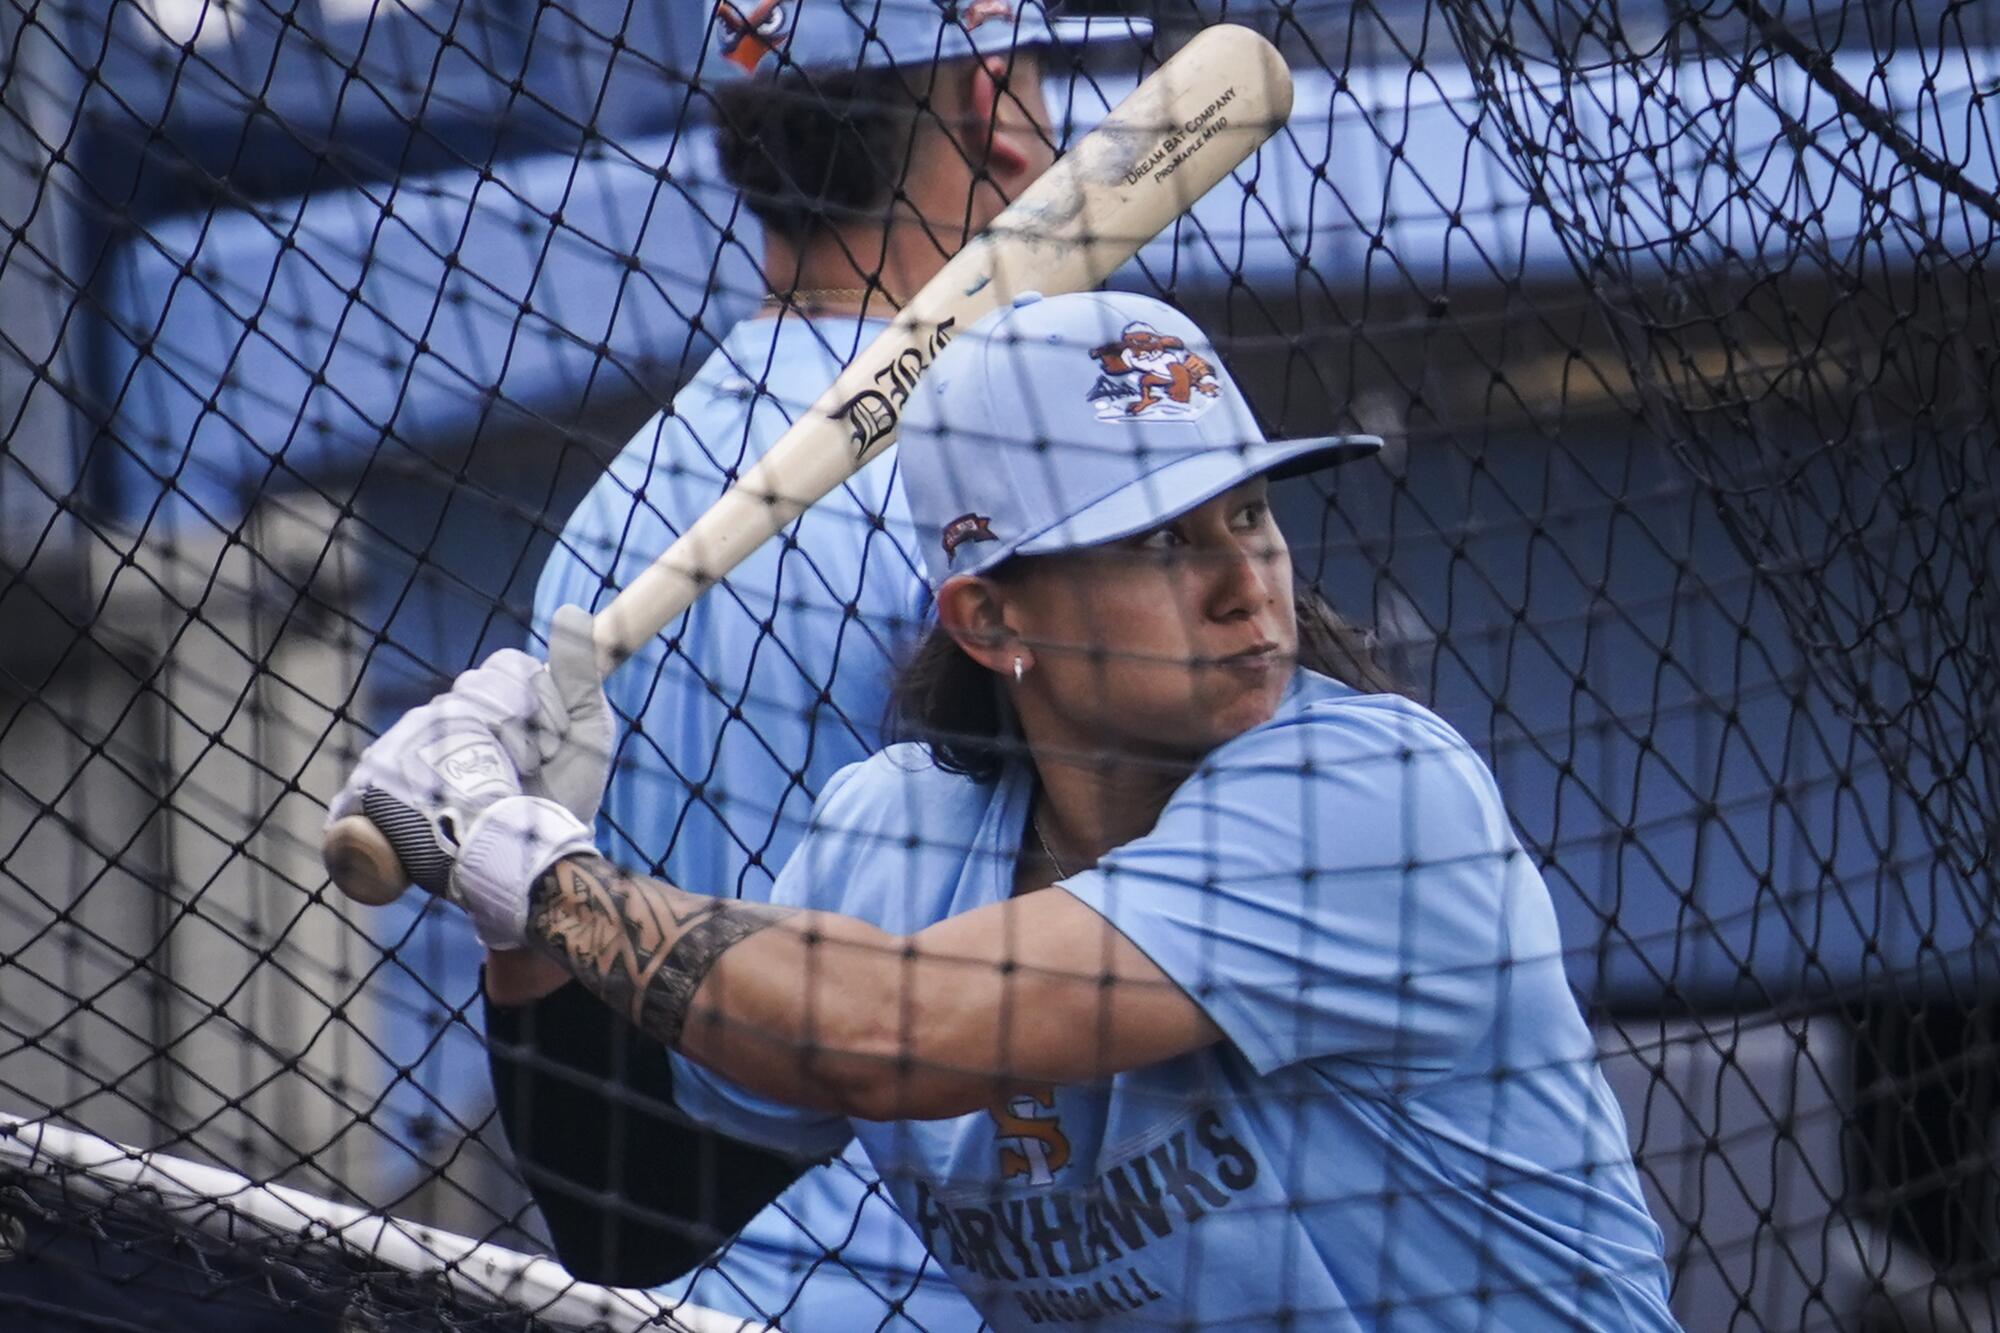 Kelsie Whitmore, a two-way player for the Atlantic League's Staten Island FerryHawks, warms up in the batting cage